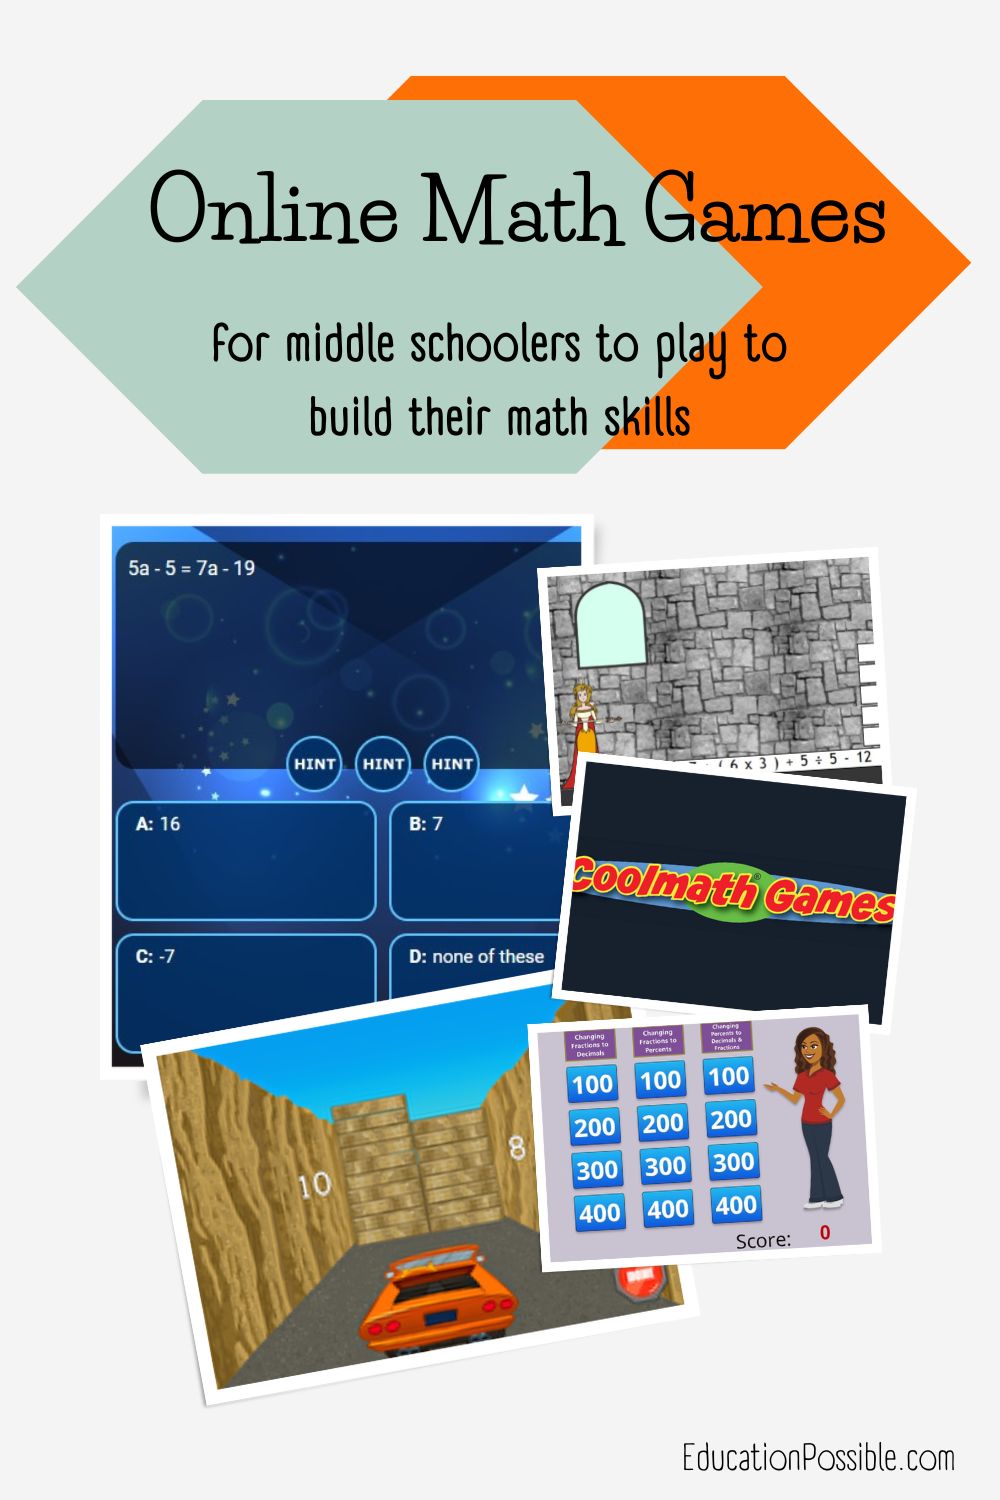 Screenshots of 5 online math games for middle schoolers.